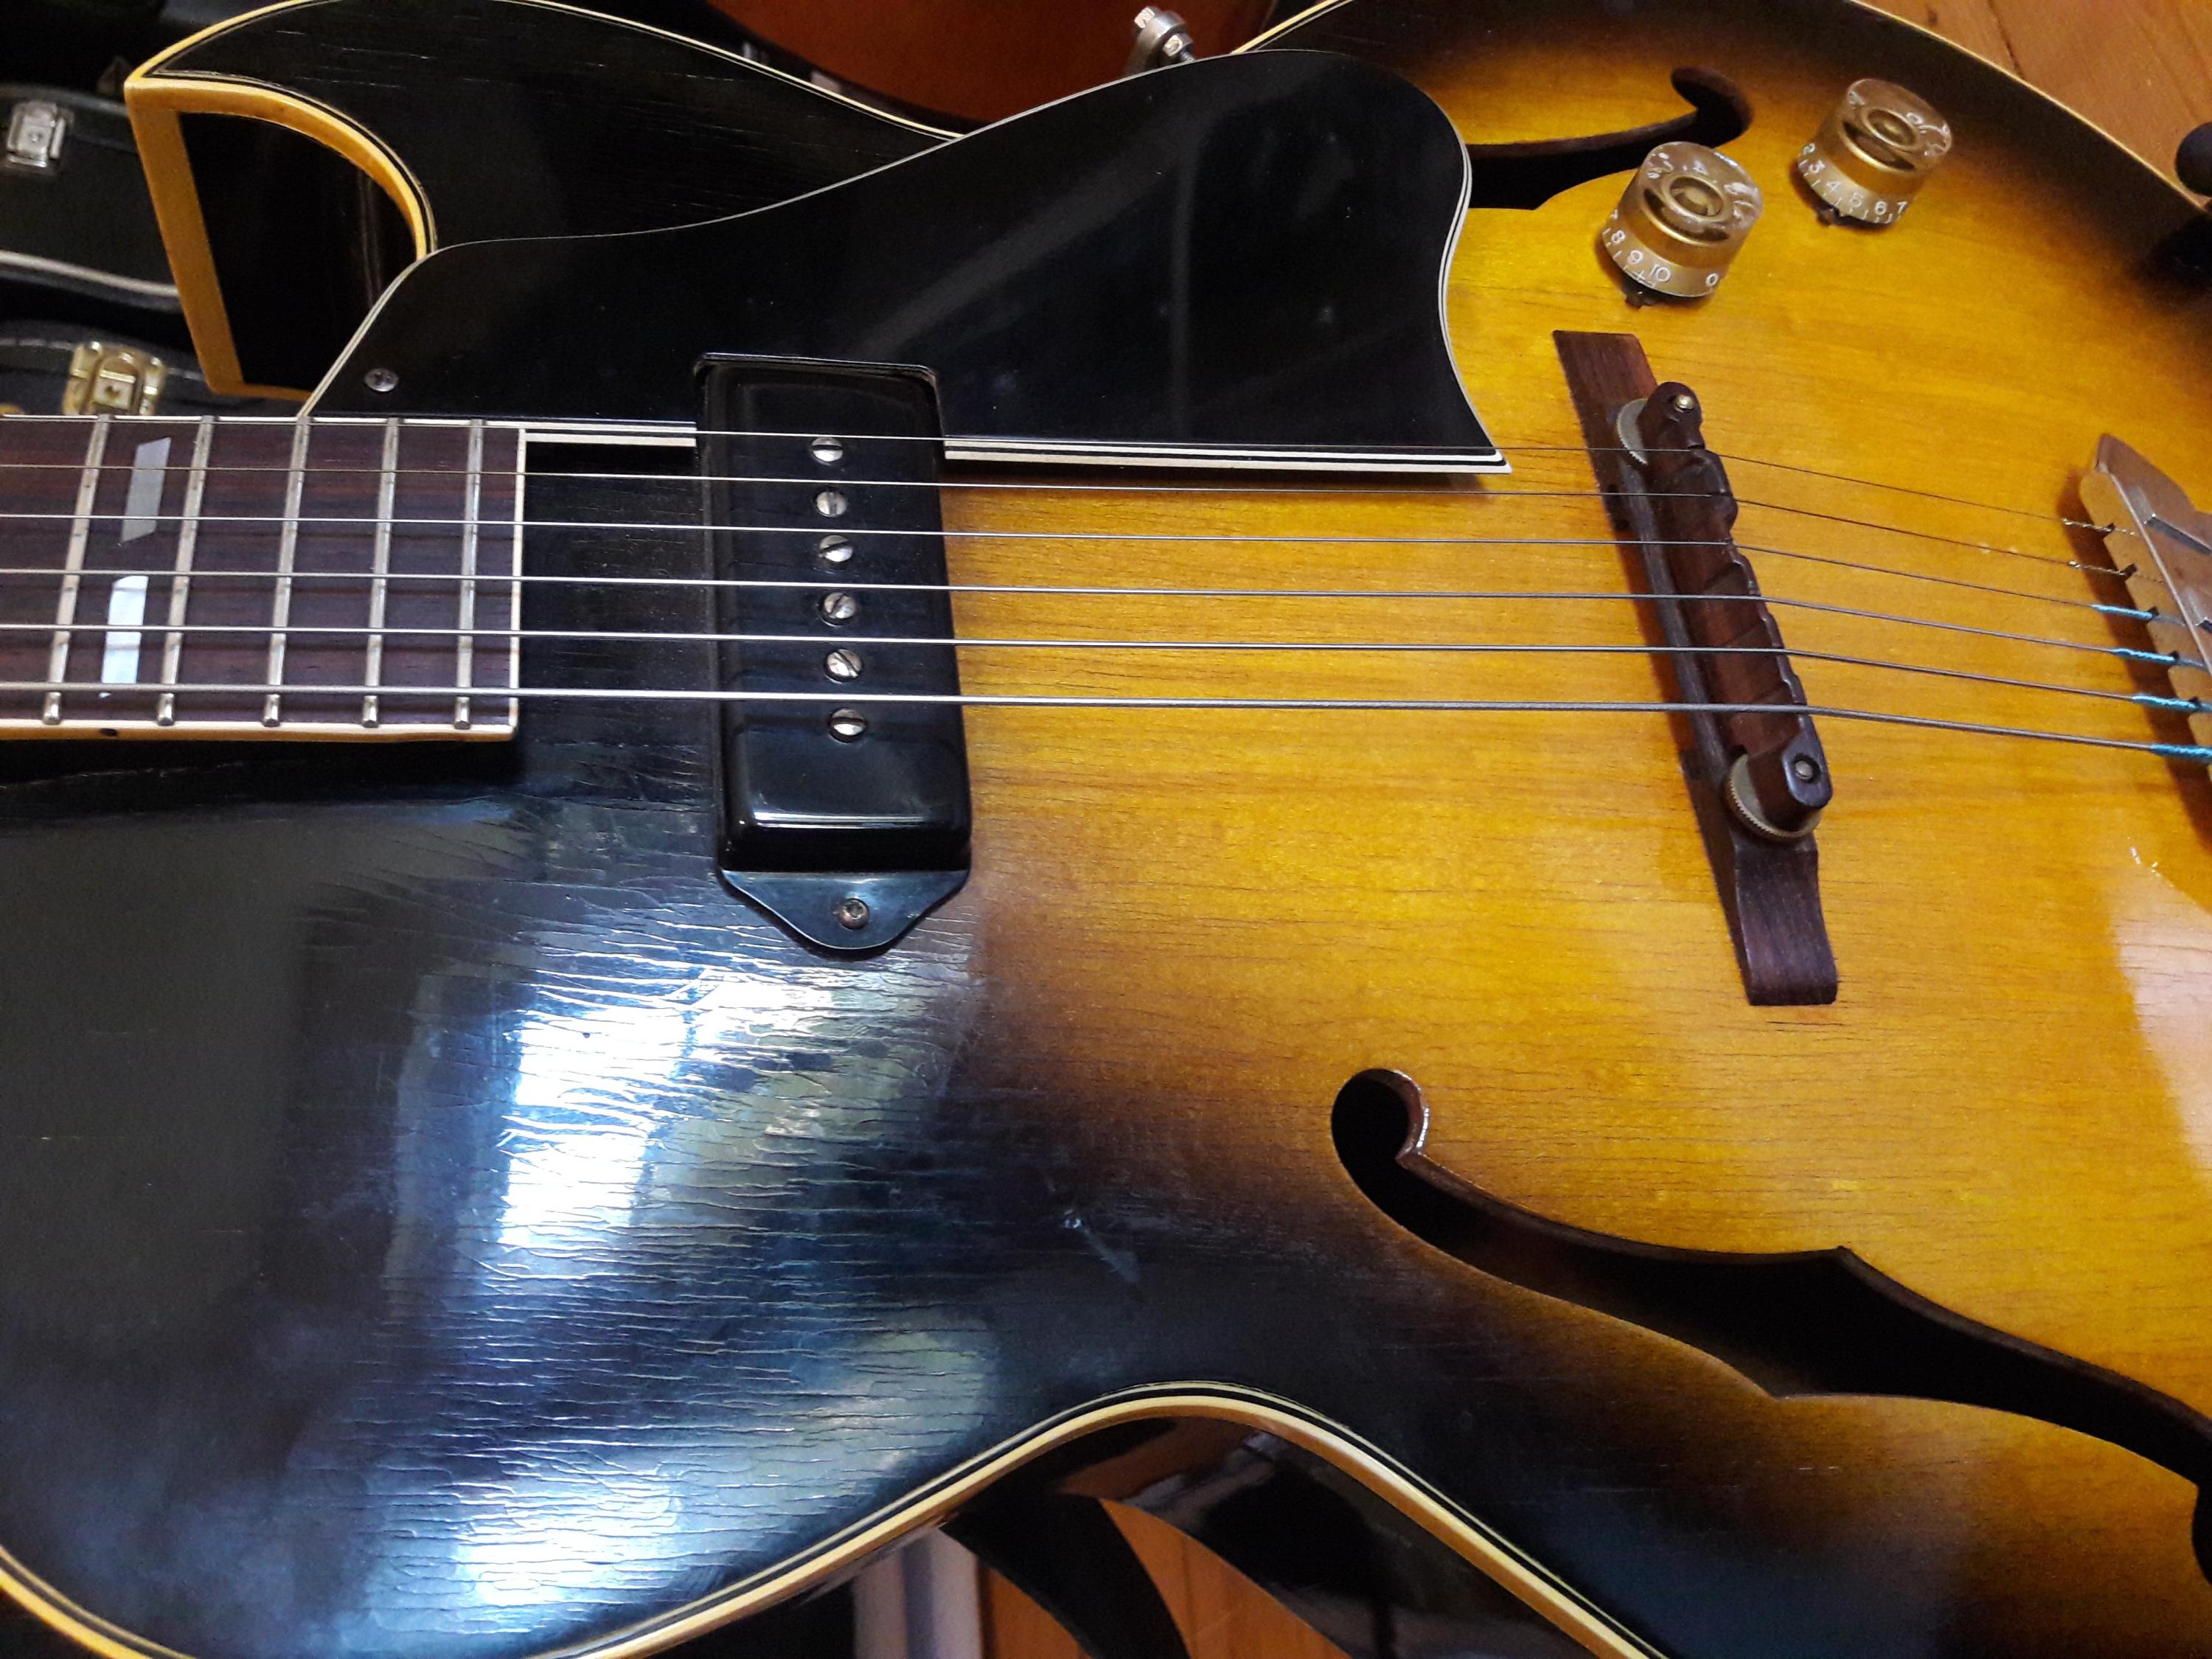 Thoughts On This Near Immaculate 1951 Gibson ES-175-20211022_084057-jpg